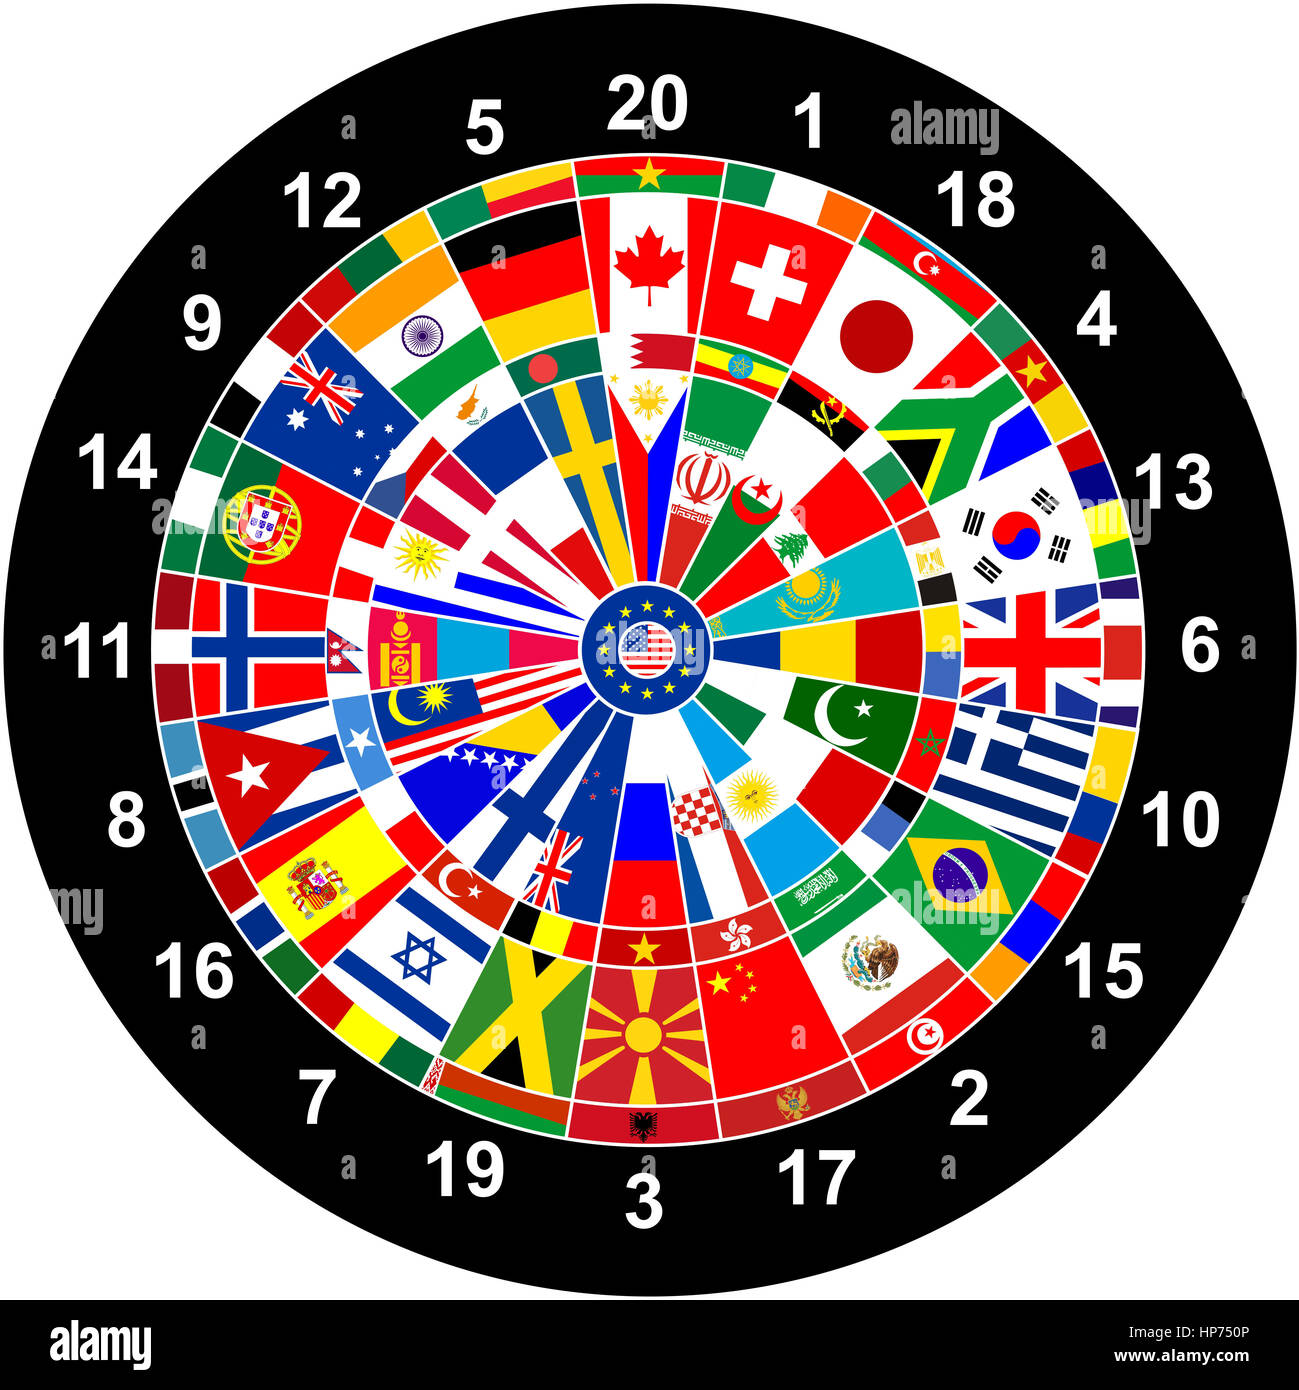 world countries flags darts board game illustration Stock Photo